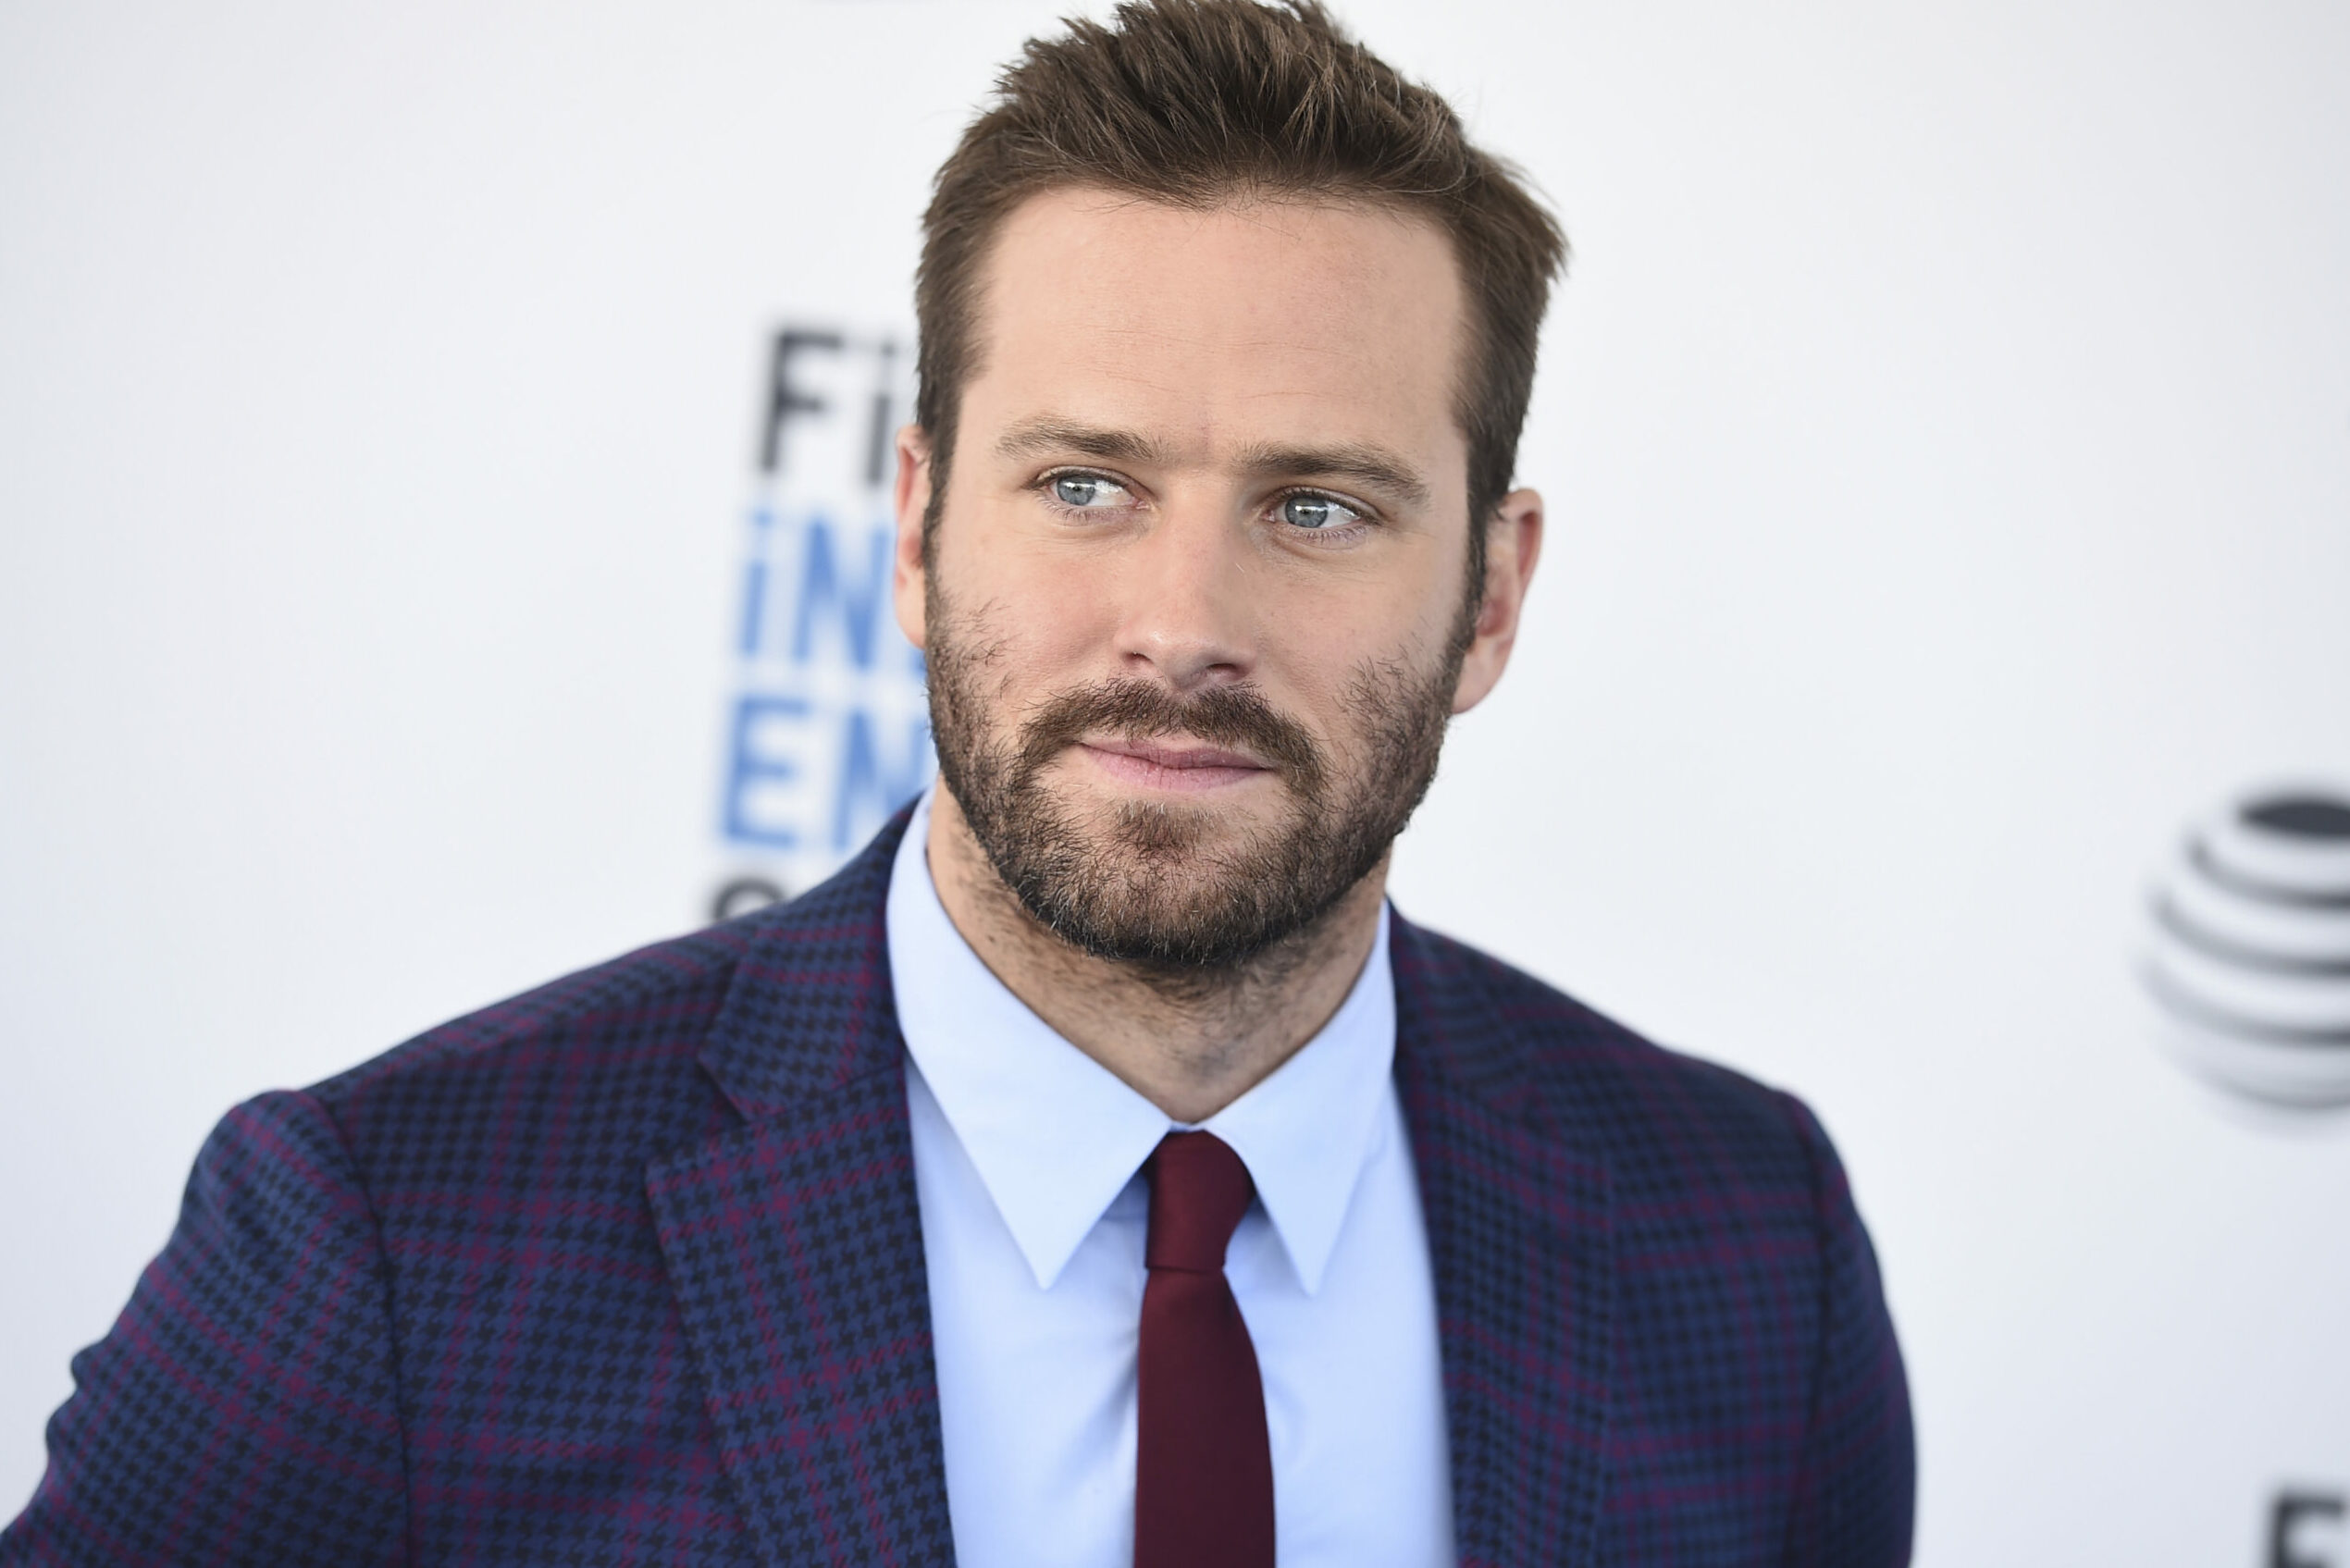 Actor Armie Hammer in rehab | drug issues and disturbing sexual fantasies